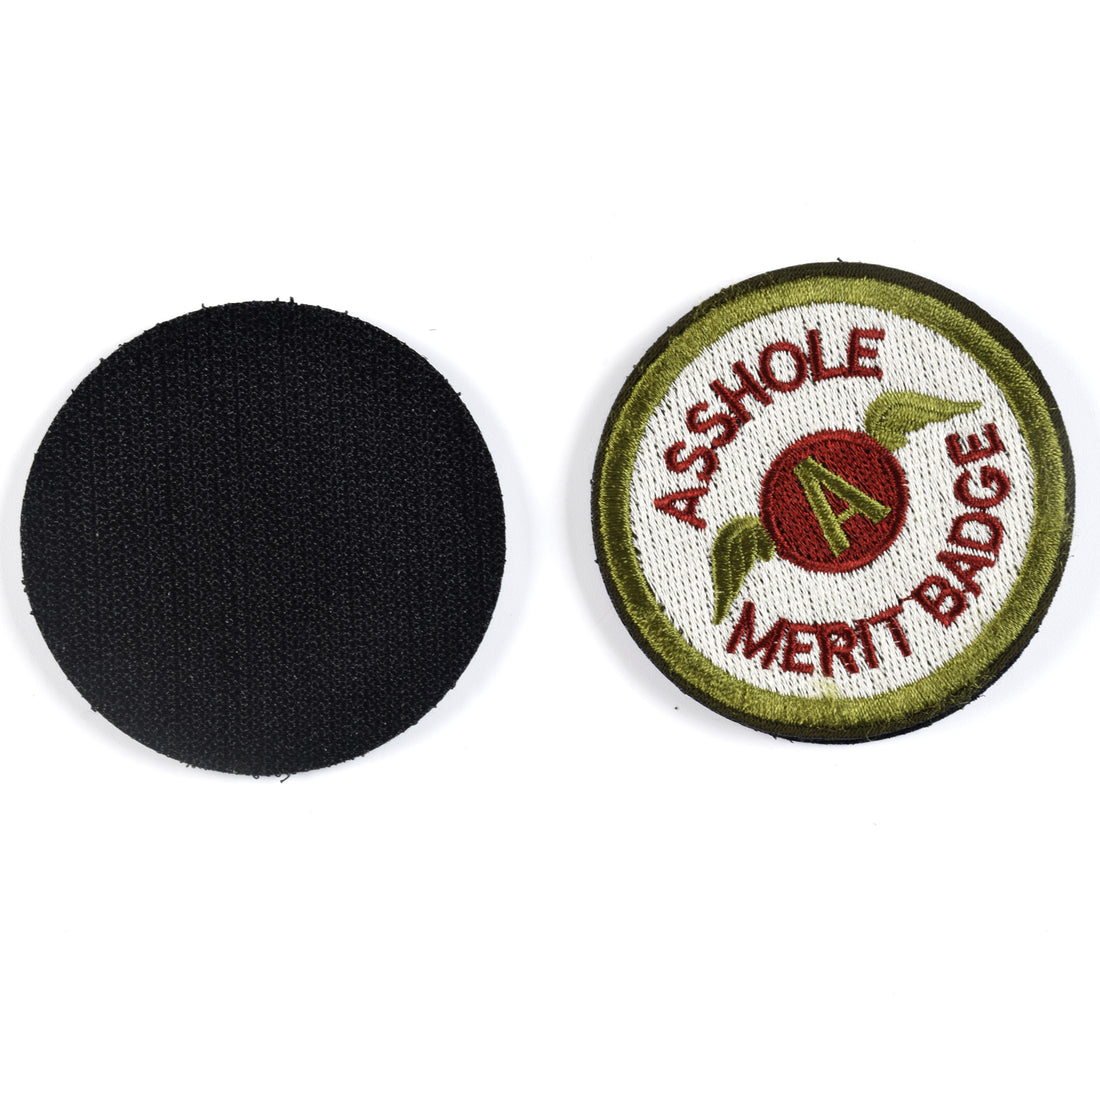 2 Pieces Asshole Merit Badge Morale Patch, Funny Tactical Military